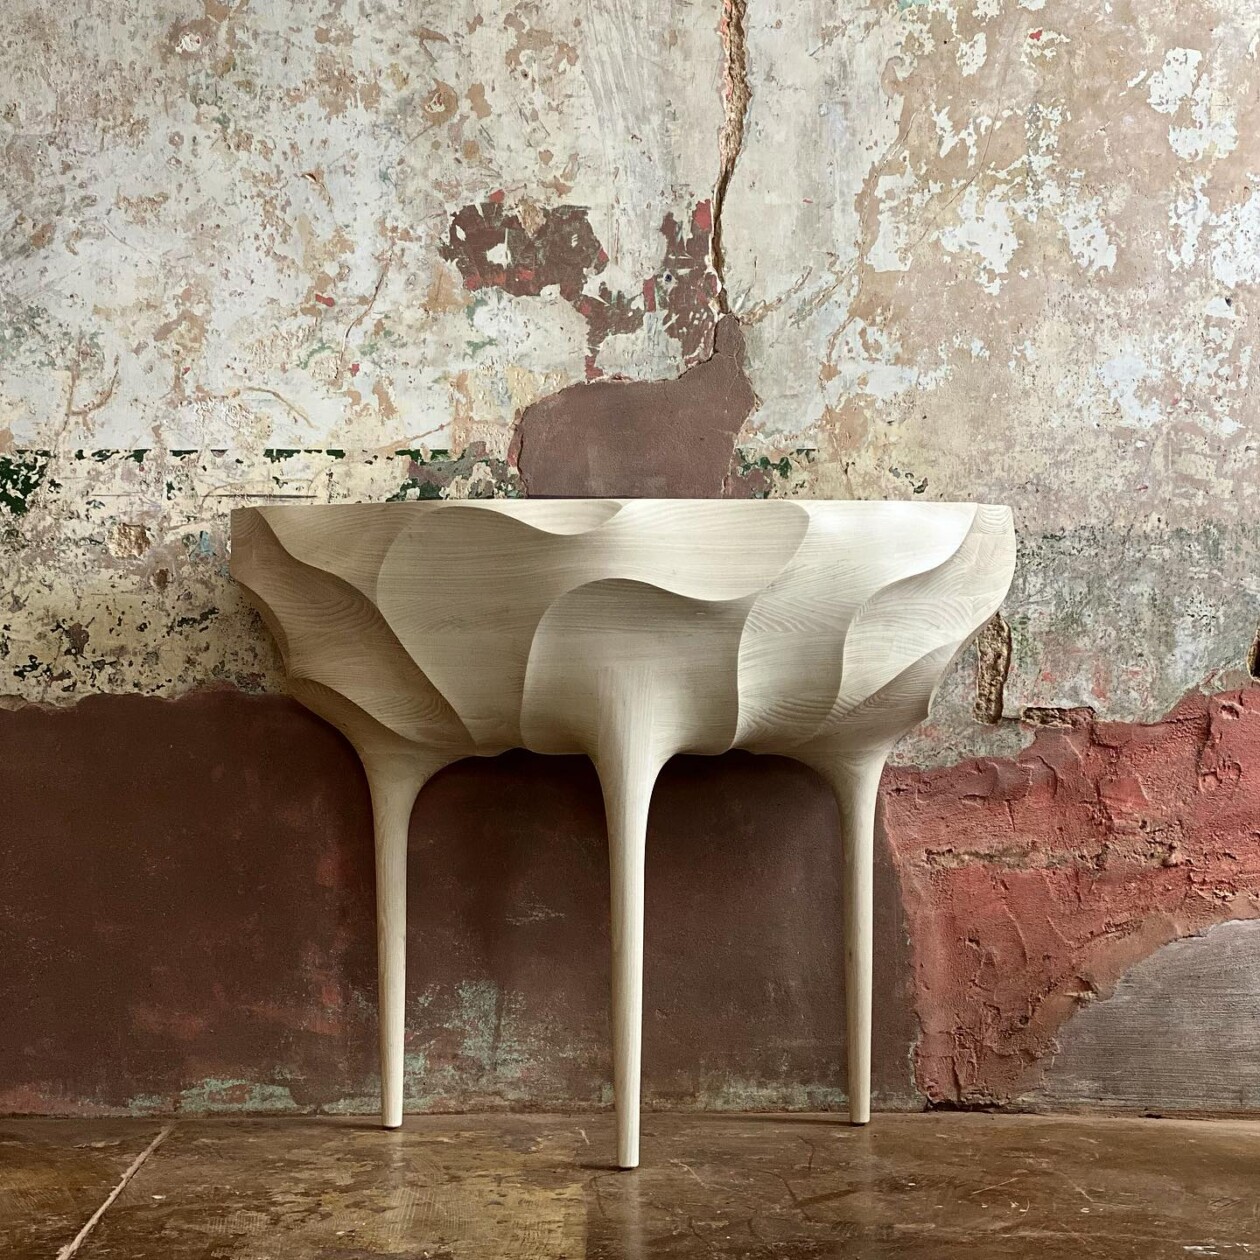 Intricately Engraved And Textured Organic Shaped Furniture By Caleb Woodard (13)